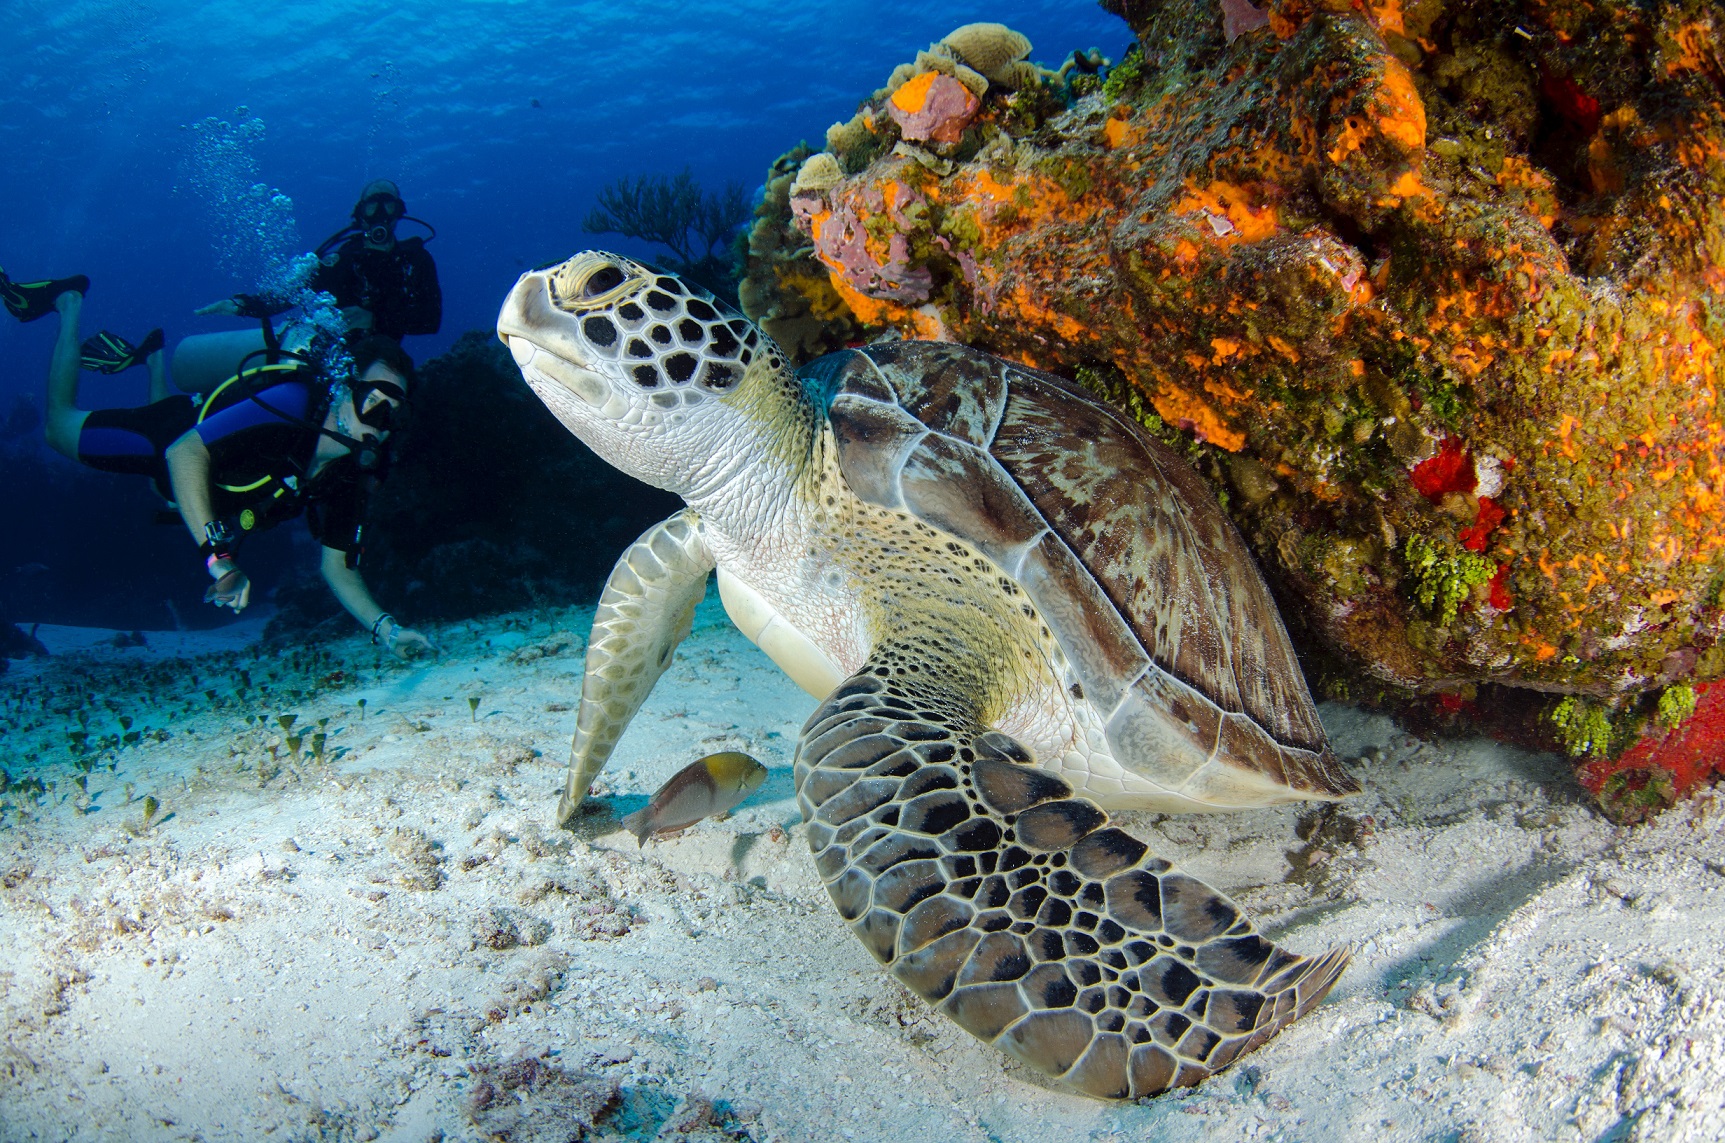 Plan your diving adventure in the Galapagos Islands